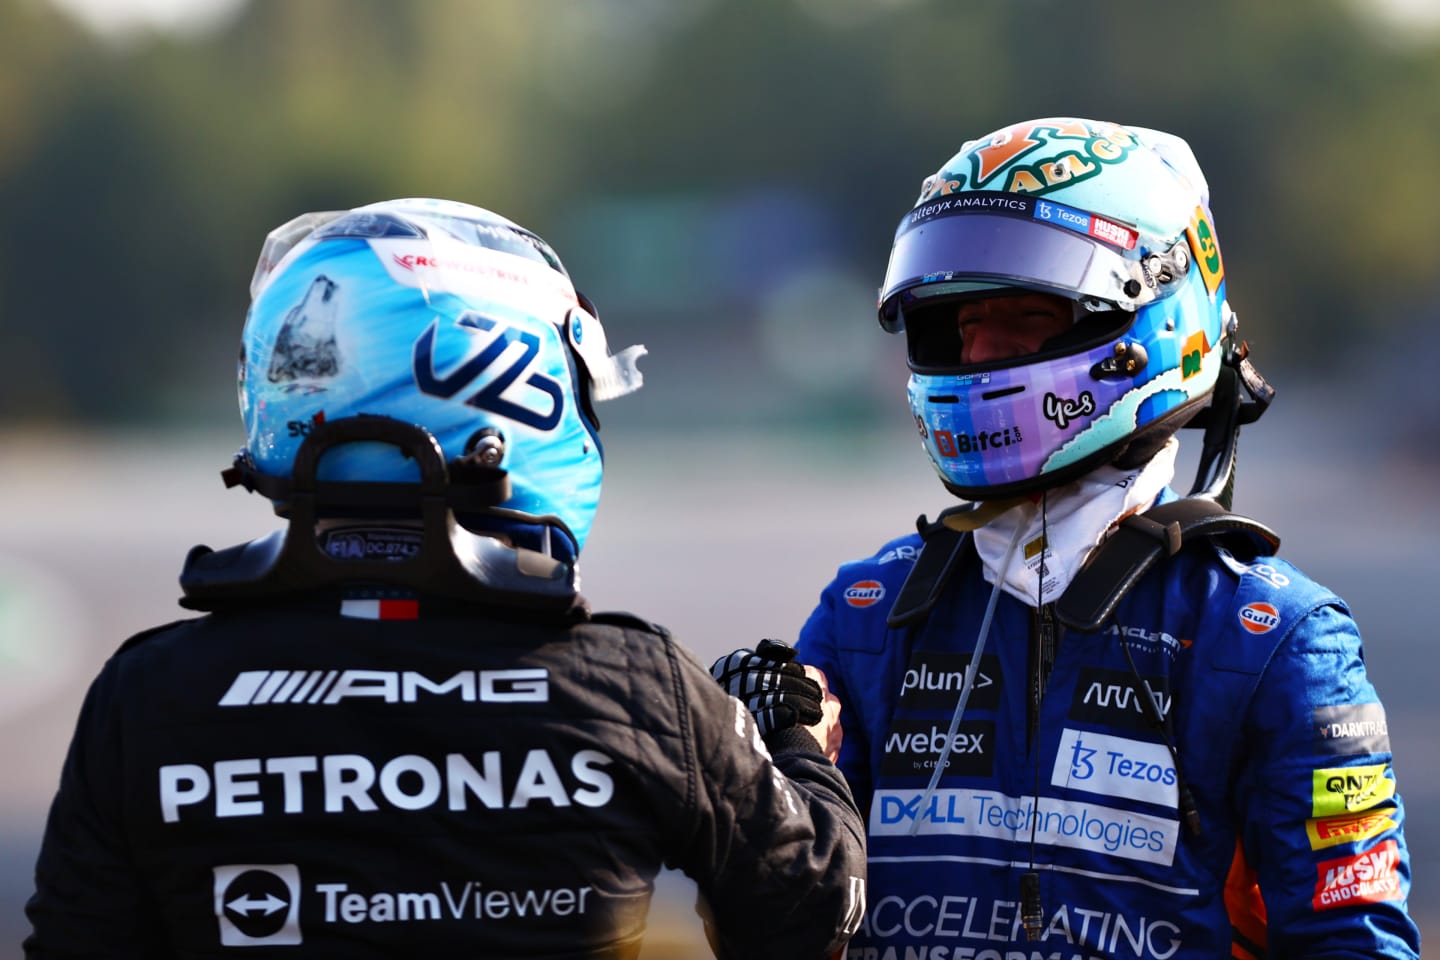 MONZA, ITALY - SEPTEMBER 11: Winner Valtteri Bottas of Finland and Mercedes GP talks with third place finisher Daniel Ricciardo of Australia and McLaren F1 during the Sprint ahead of the F1 Grand Prix of Italy at Autodromo di Monza on September 11, 2021 in Monza, Italy. (Photo by Dan Istitene - Formula 1/Formula 1 via Getty Images)